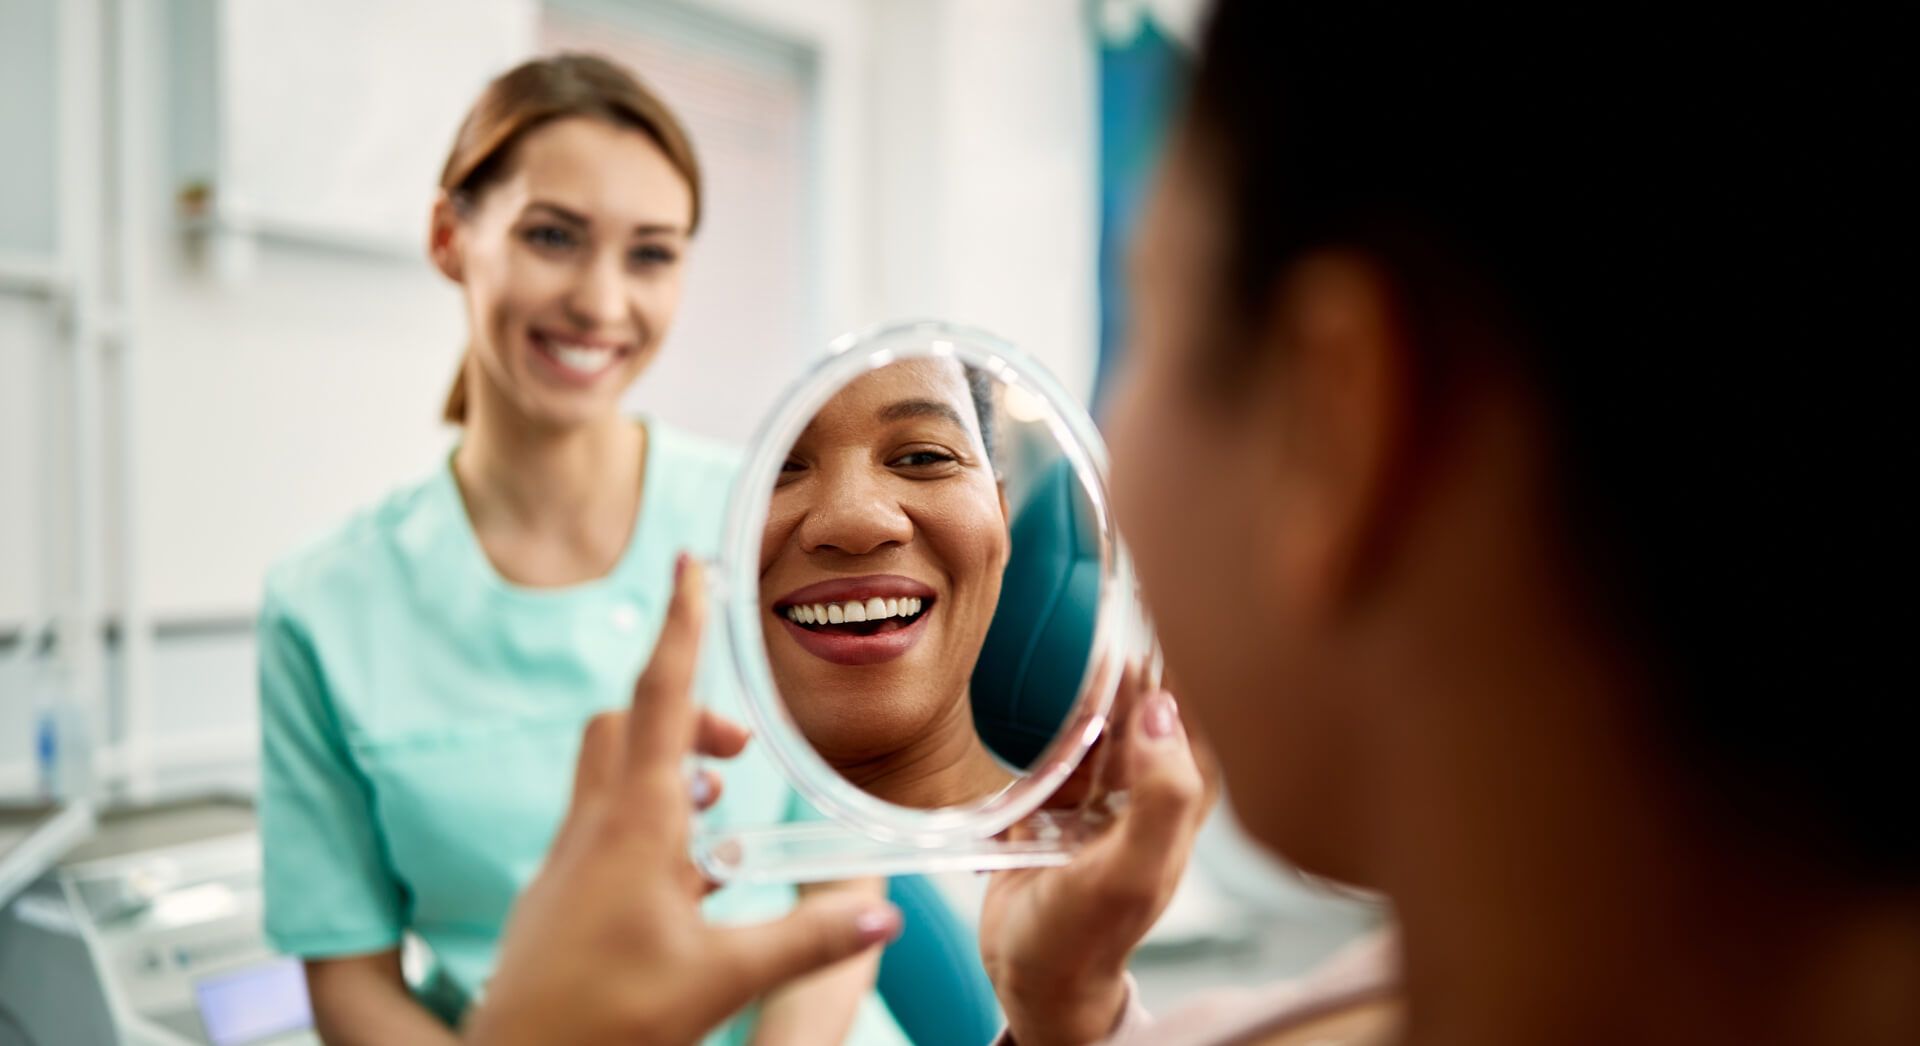 Woman using mirror while looking at her teeth after dental check up